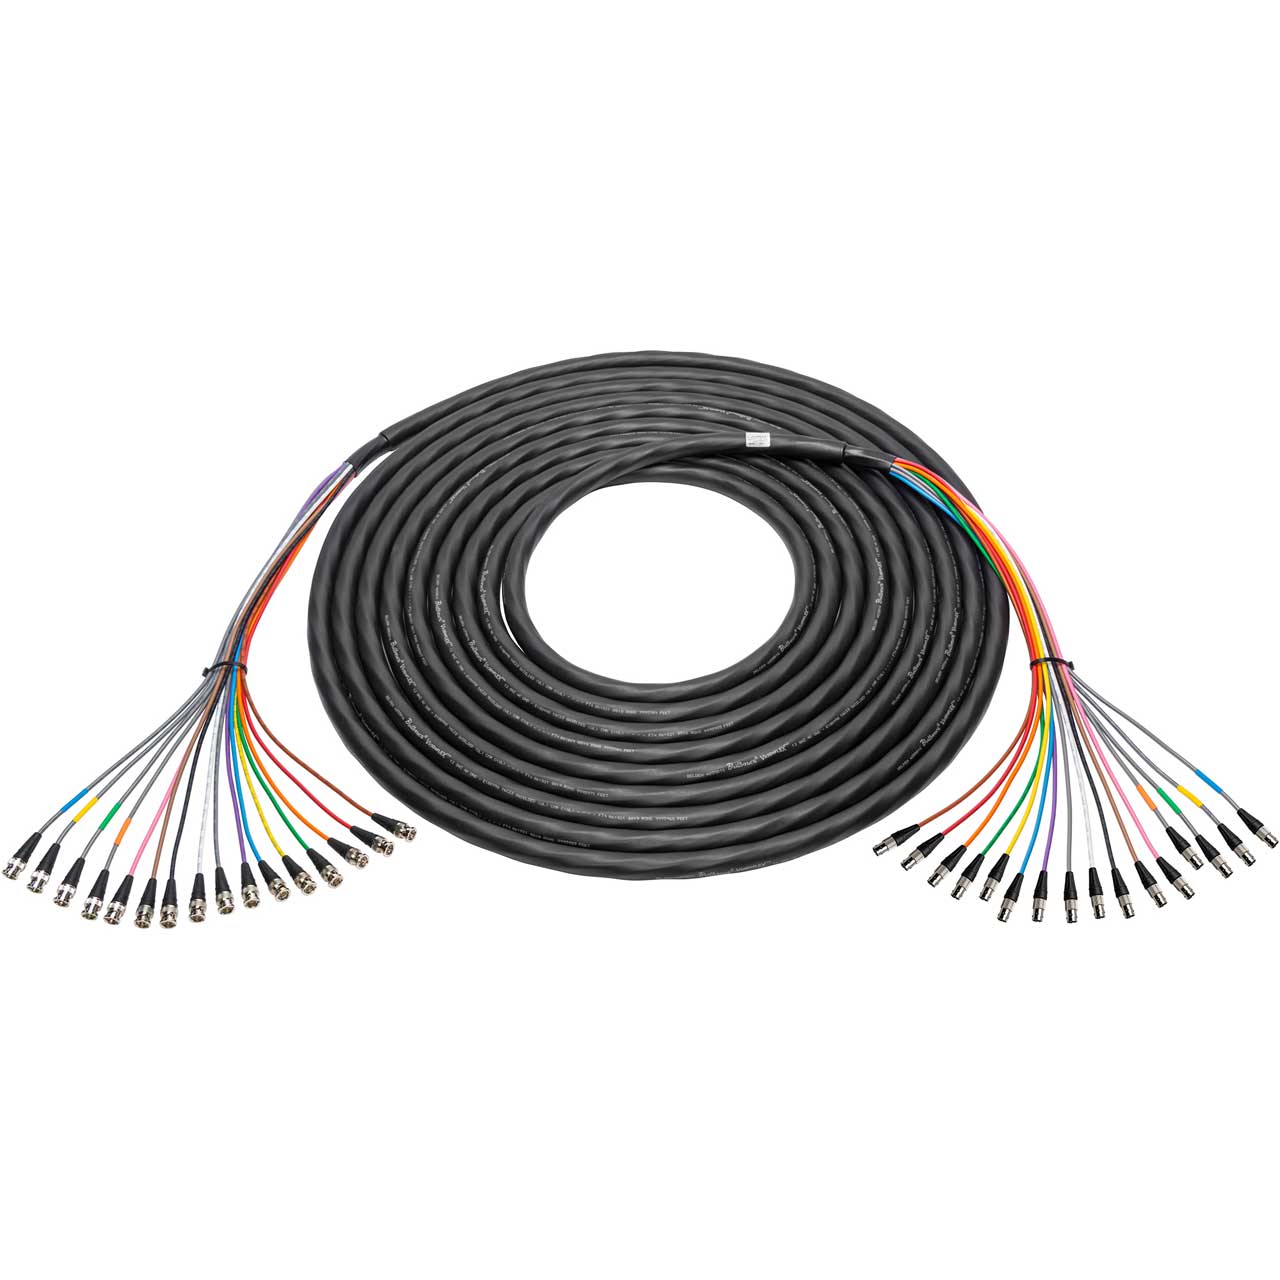 Laird 4855R16-BBF-125 16-Channel 12G-SDI / 4K UHD BNC Male to BNC Female Snake Cable - 125 Foot 4855R16-BBF-125